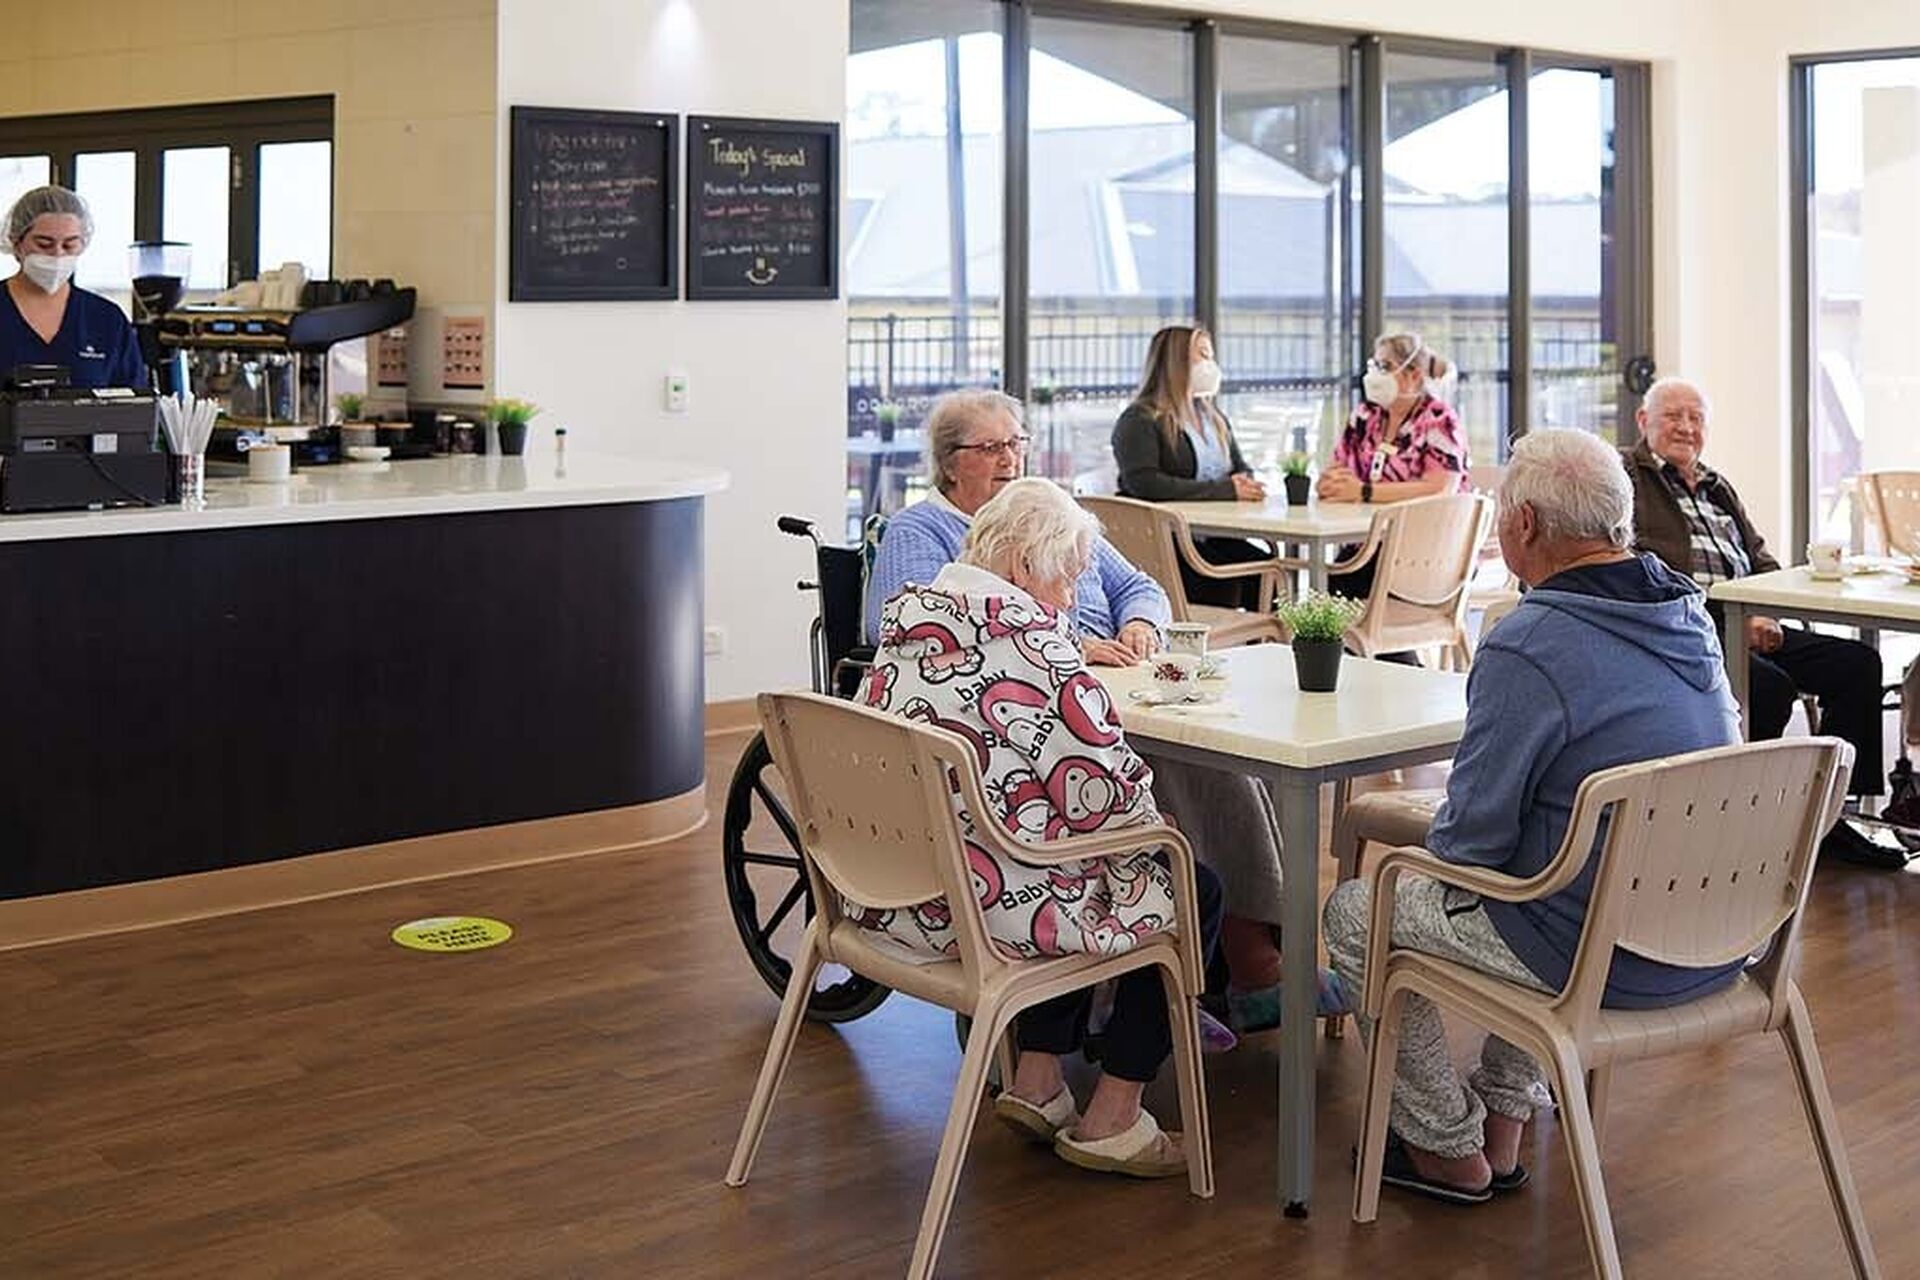 cafe for aged care residents to enjoy coffee and socialise at baptistcare bethshan gardens centre aged care home in wyee nsw lake macquarie